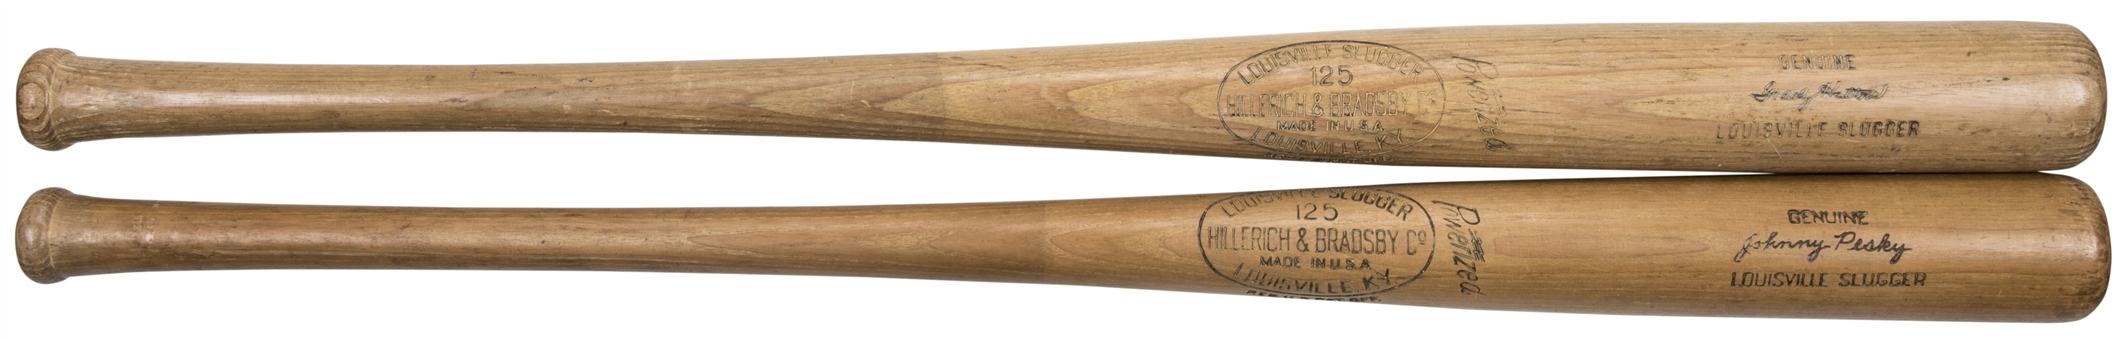 Lot of (2) Game Used Bats: Hatton & Pesky (PSA/DNA)